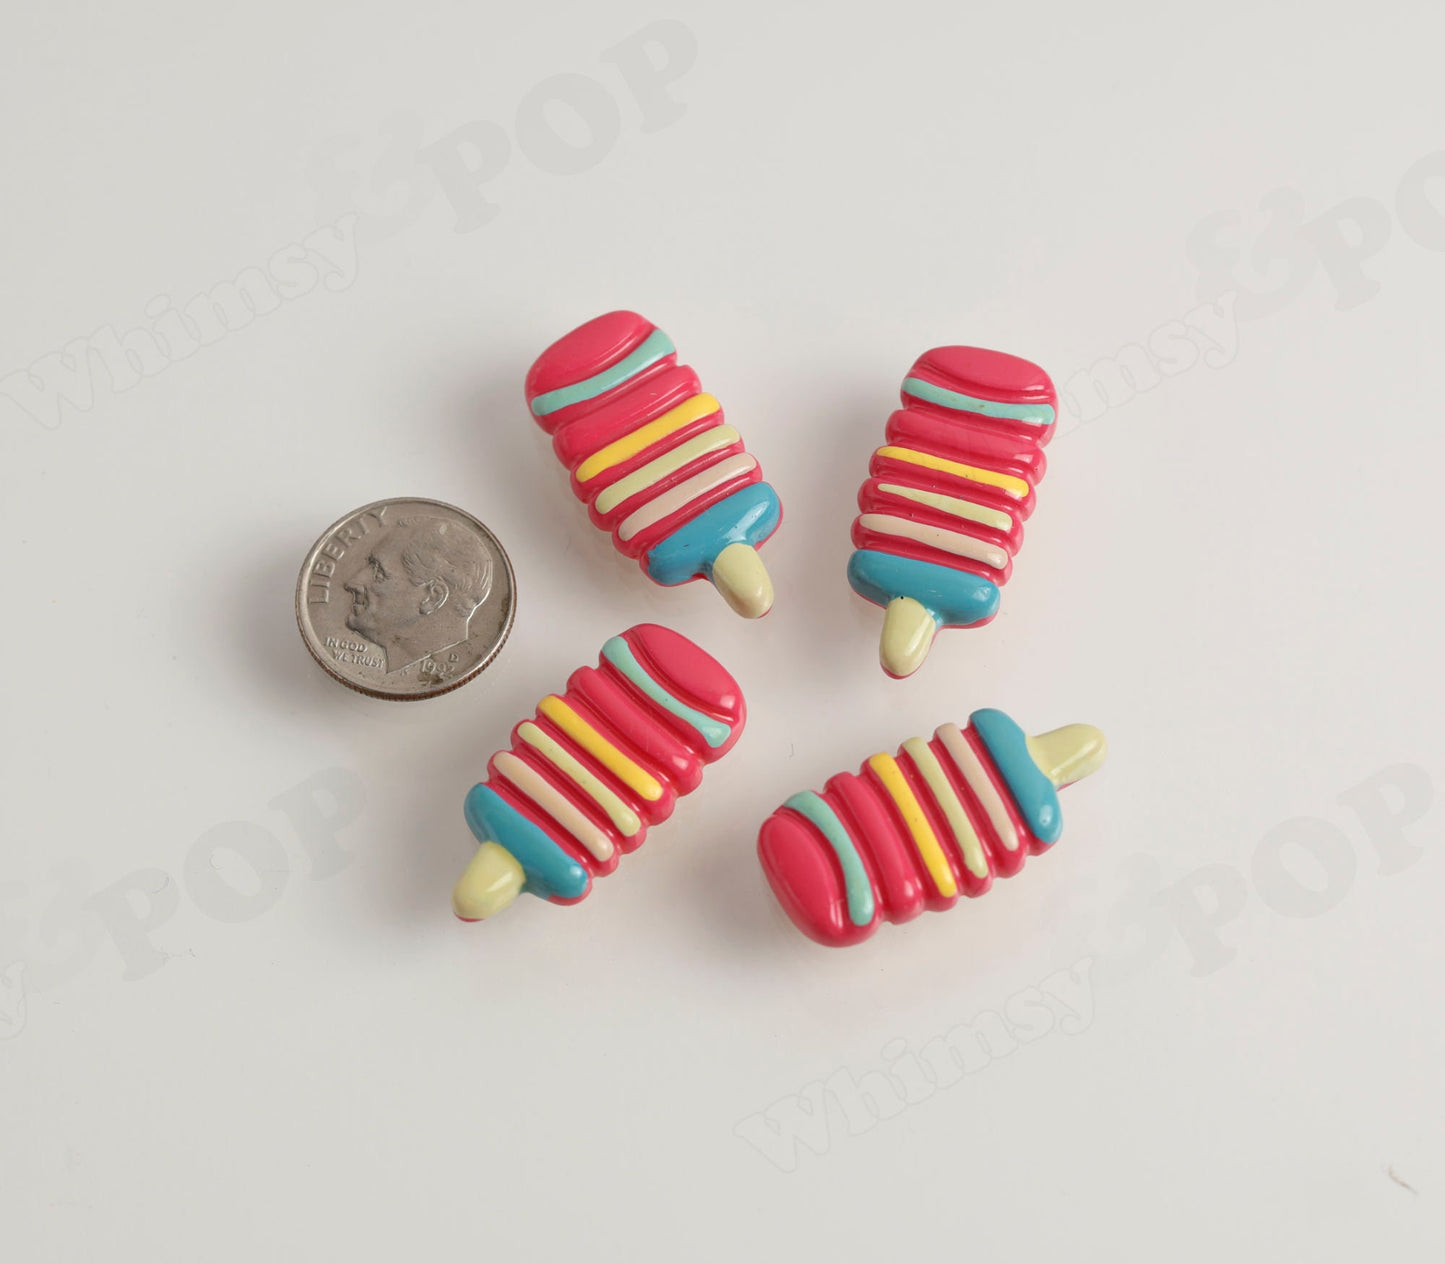 Ice Cream Cabochons, Kawaii Cabochons, Ice Cream Cone Double Scoop Resin Flatback Cabochons, 12mm x 23mm (R6-075) Slime Beads